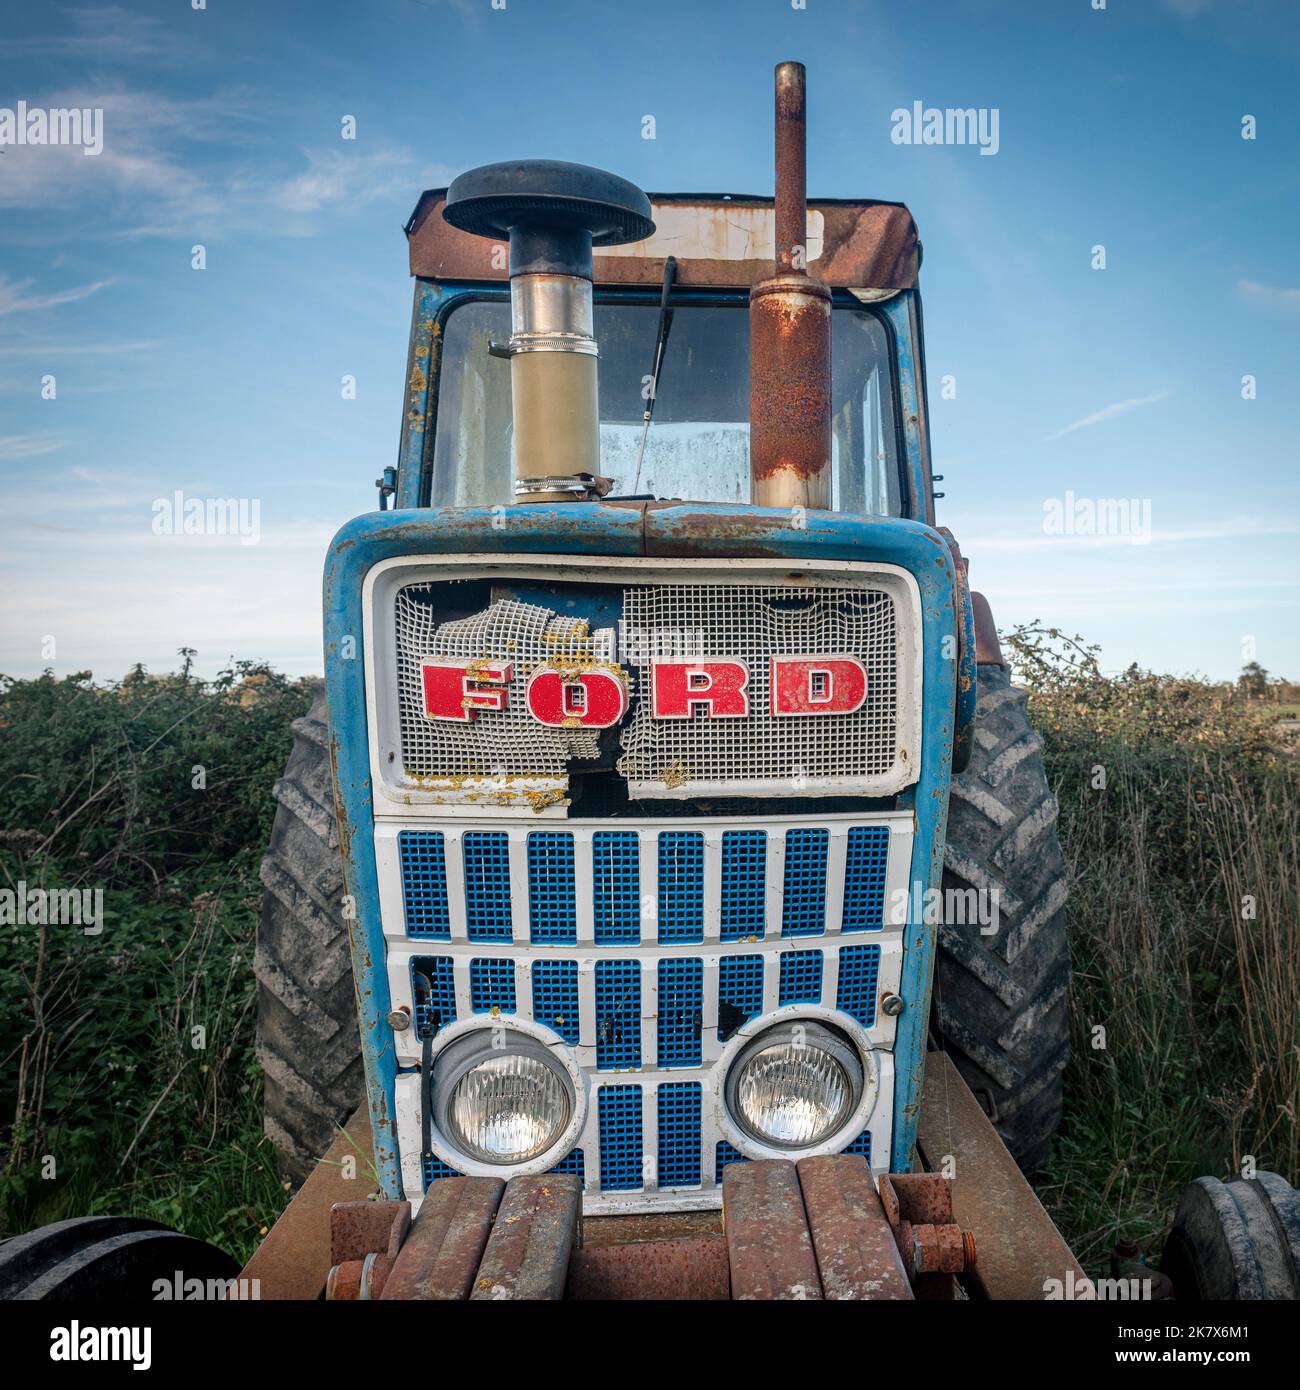 Old Ford tractor in a field, front view. Stock Photo